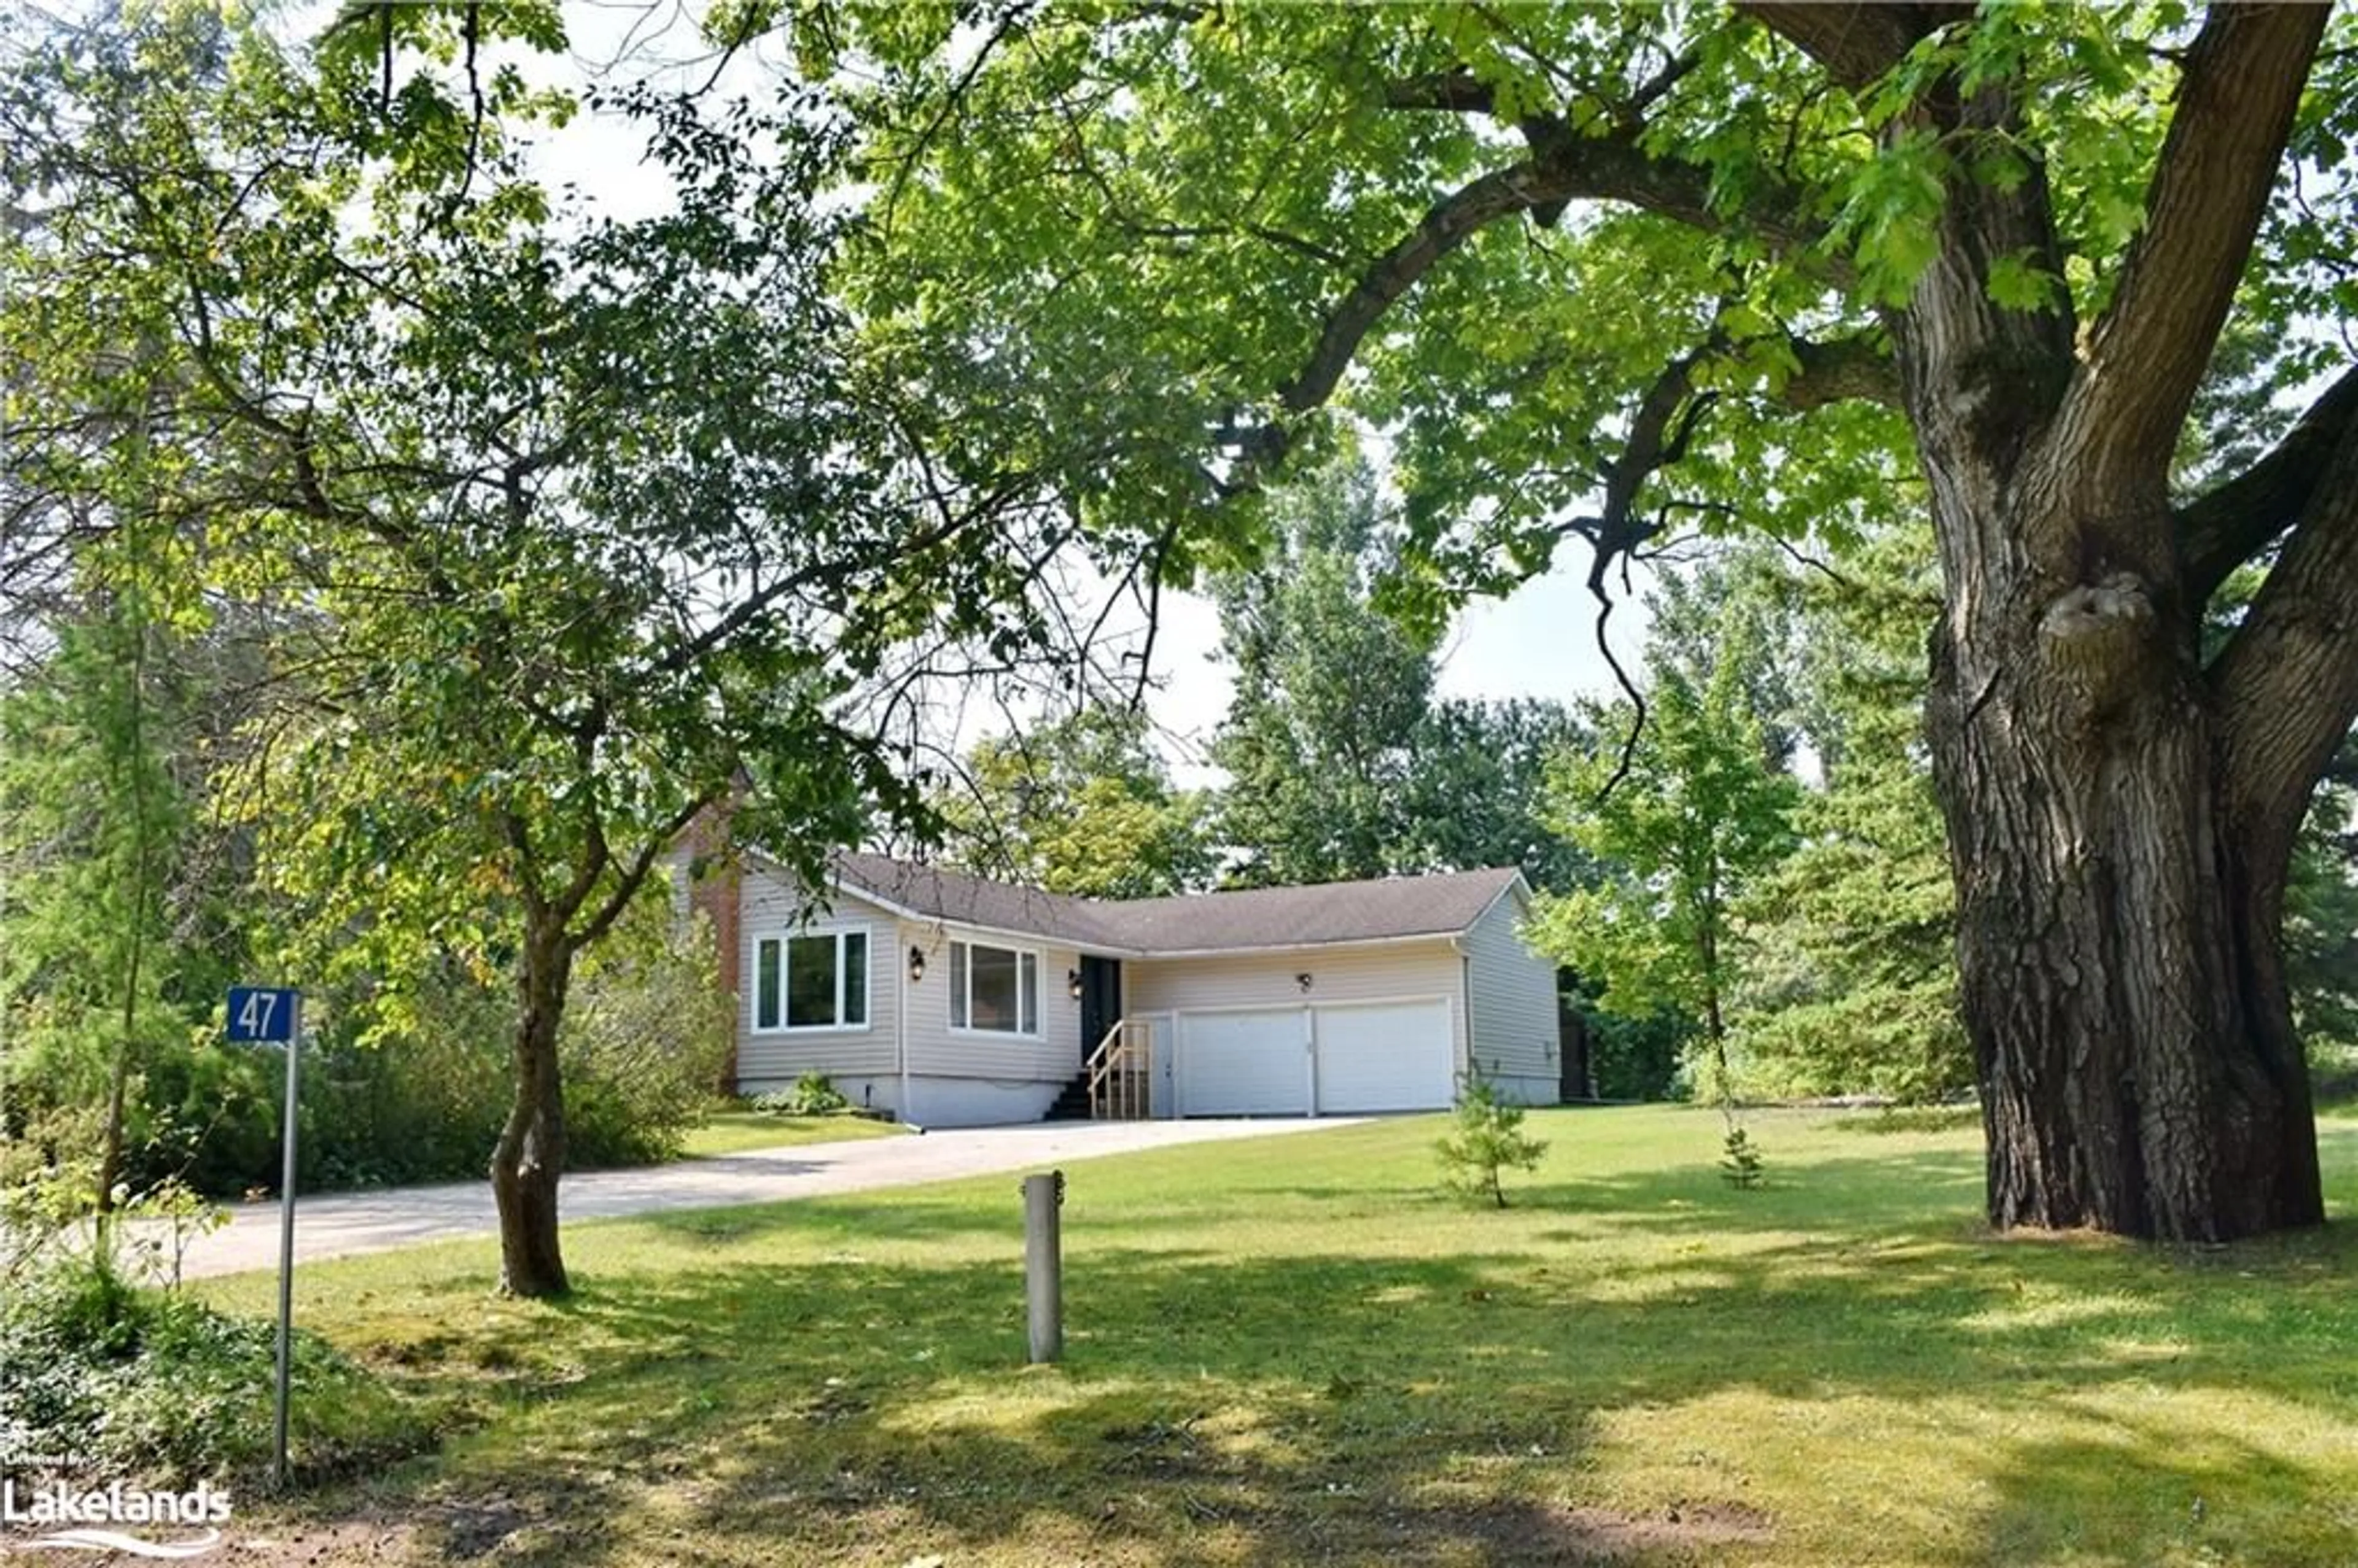 Outside view for 47 Woodland Dr, Wasaga Beach Ontario L9Z 2V5